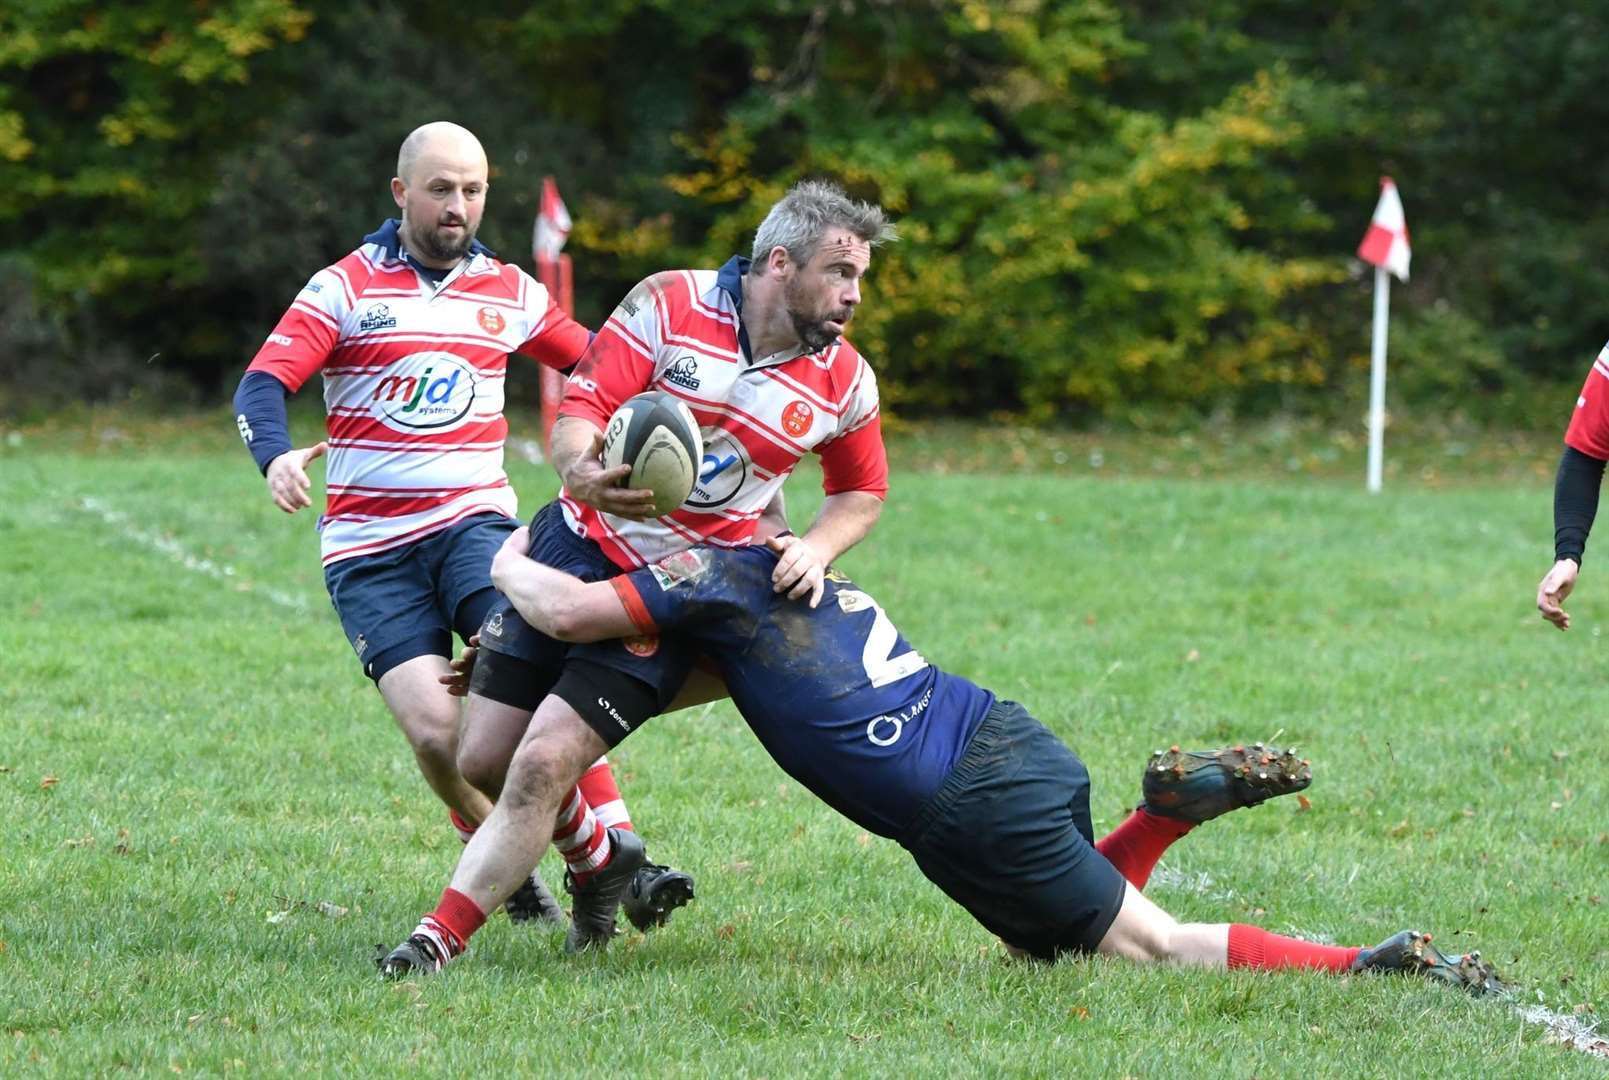 Chris Robottom looks to offload. In support is Rupert Holt. Photo: James Officer